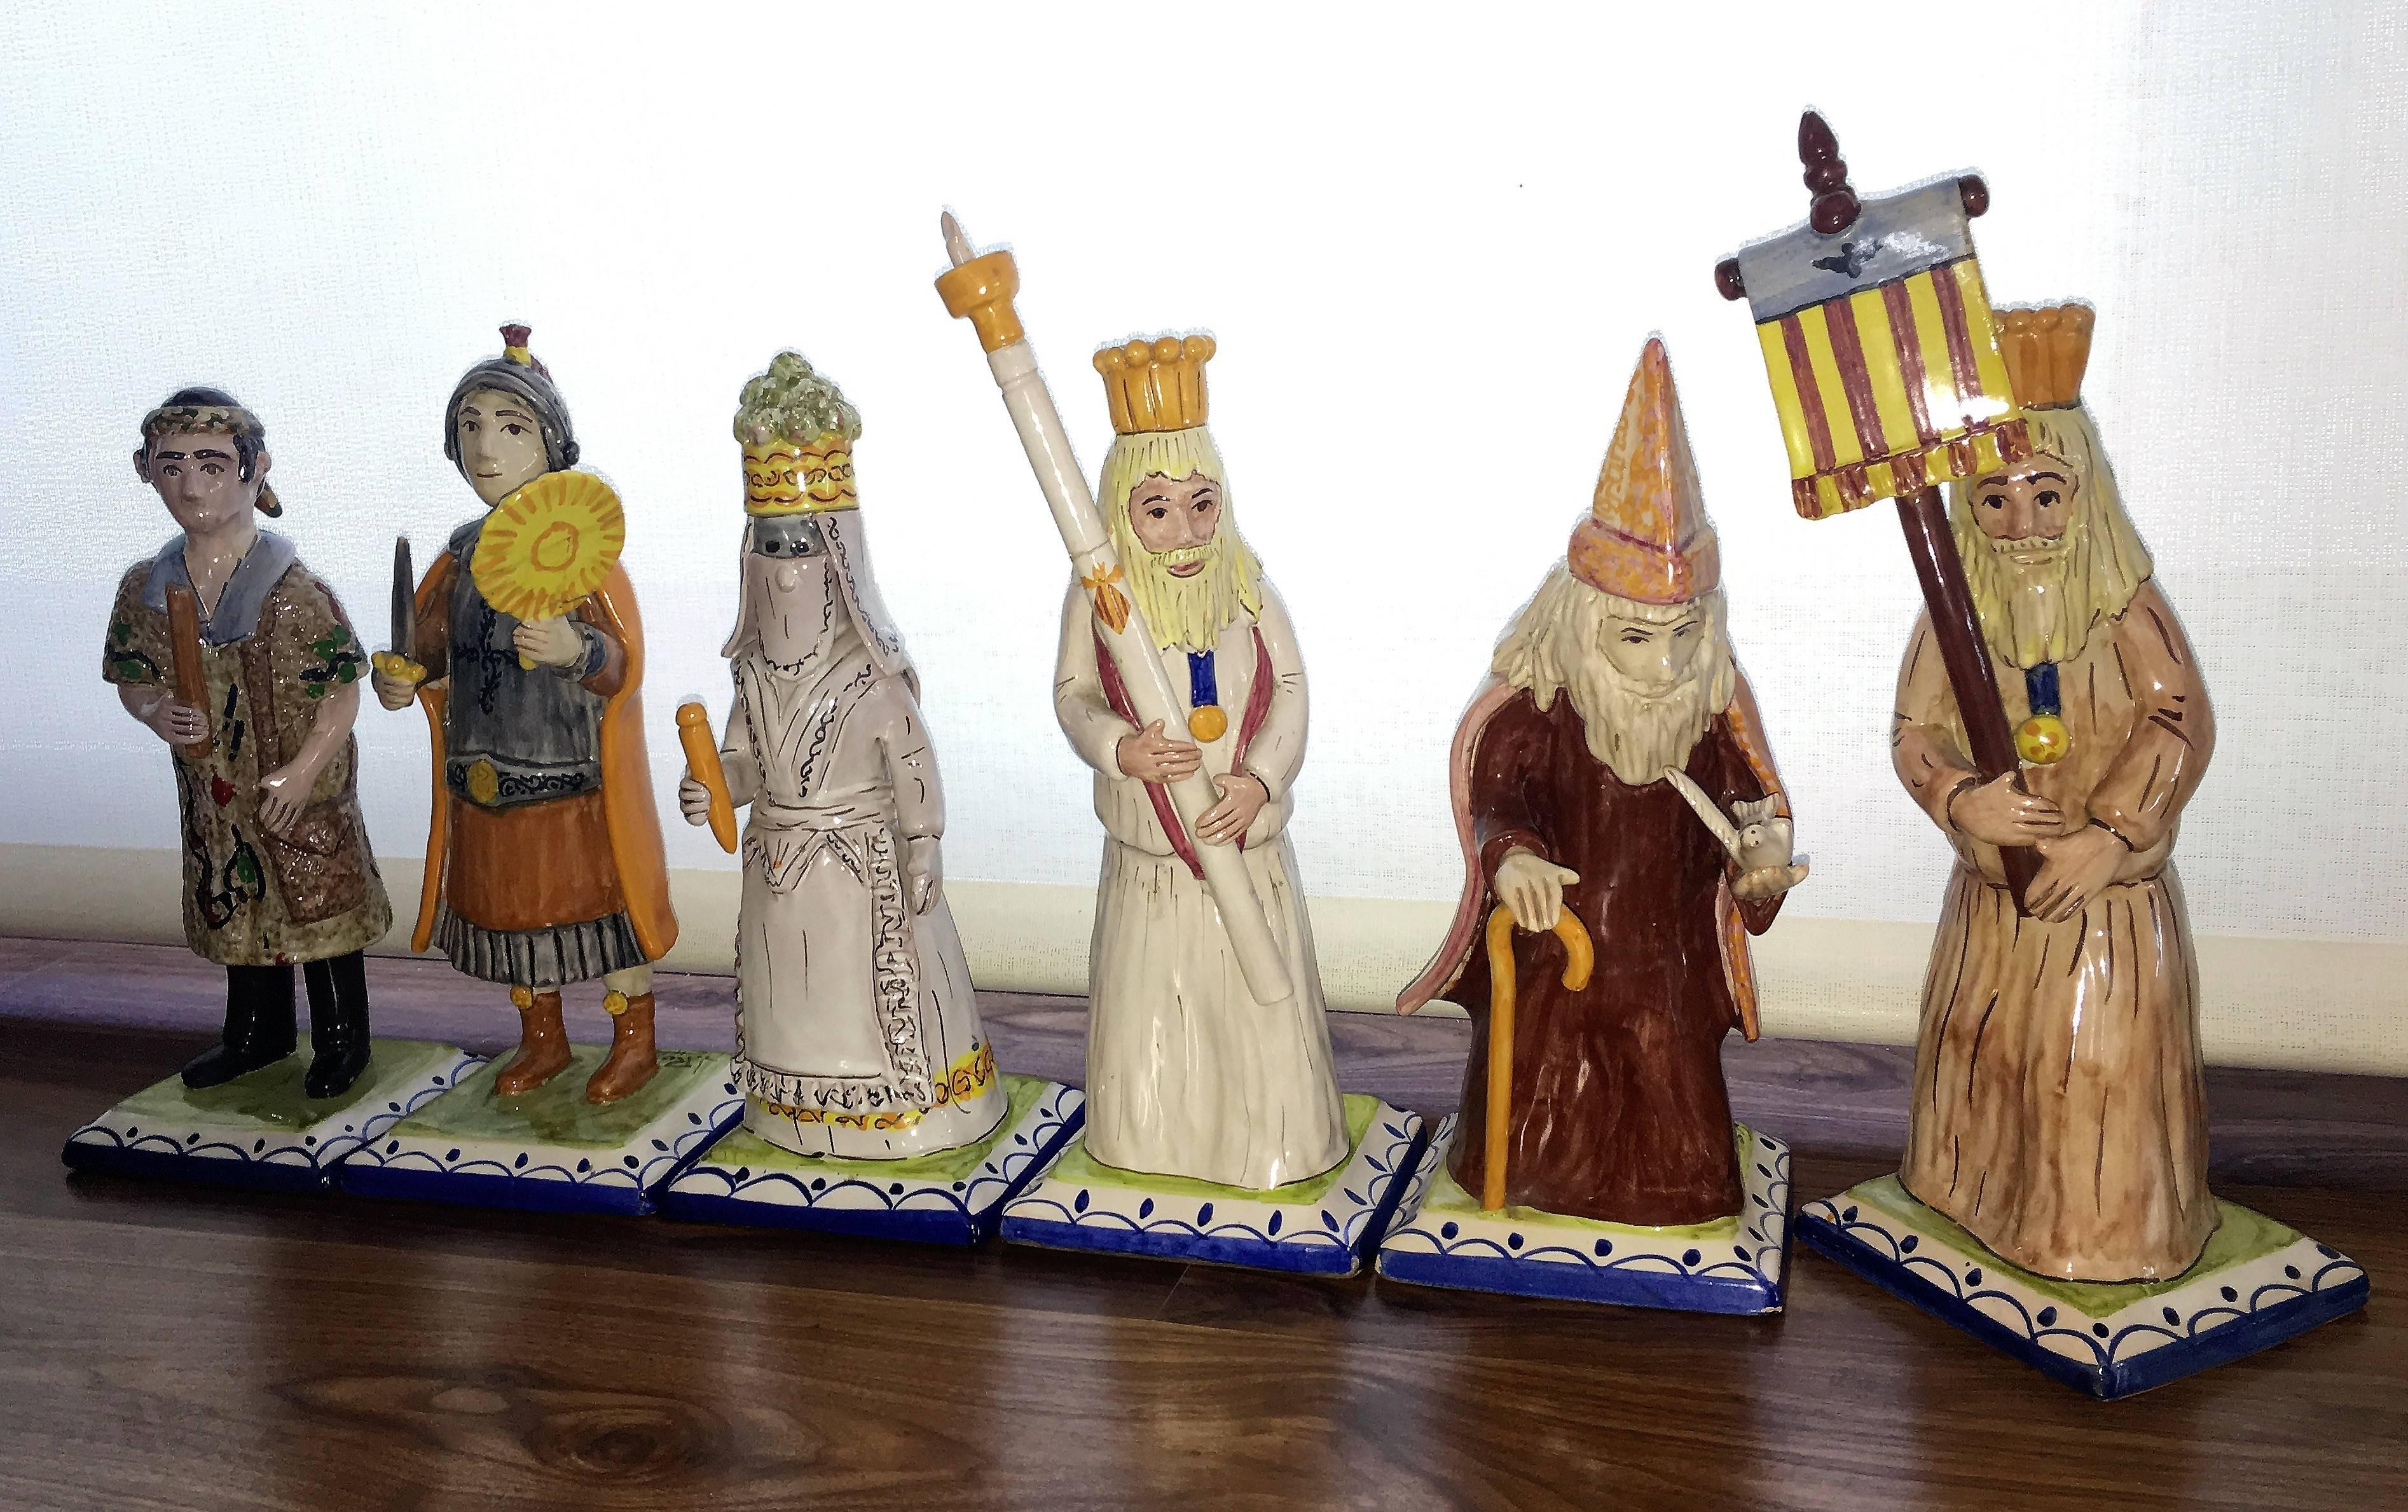 Set of six polychromed figures depicting the processions of holy week in Valencia, Spain
All the sculptures signed by the ceramist Antonio Peiró.